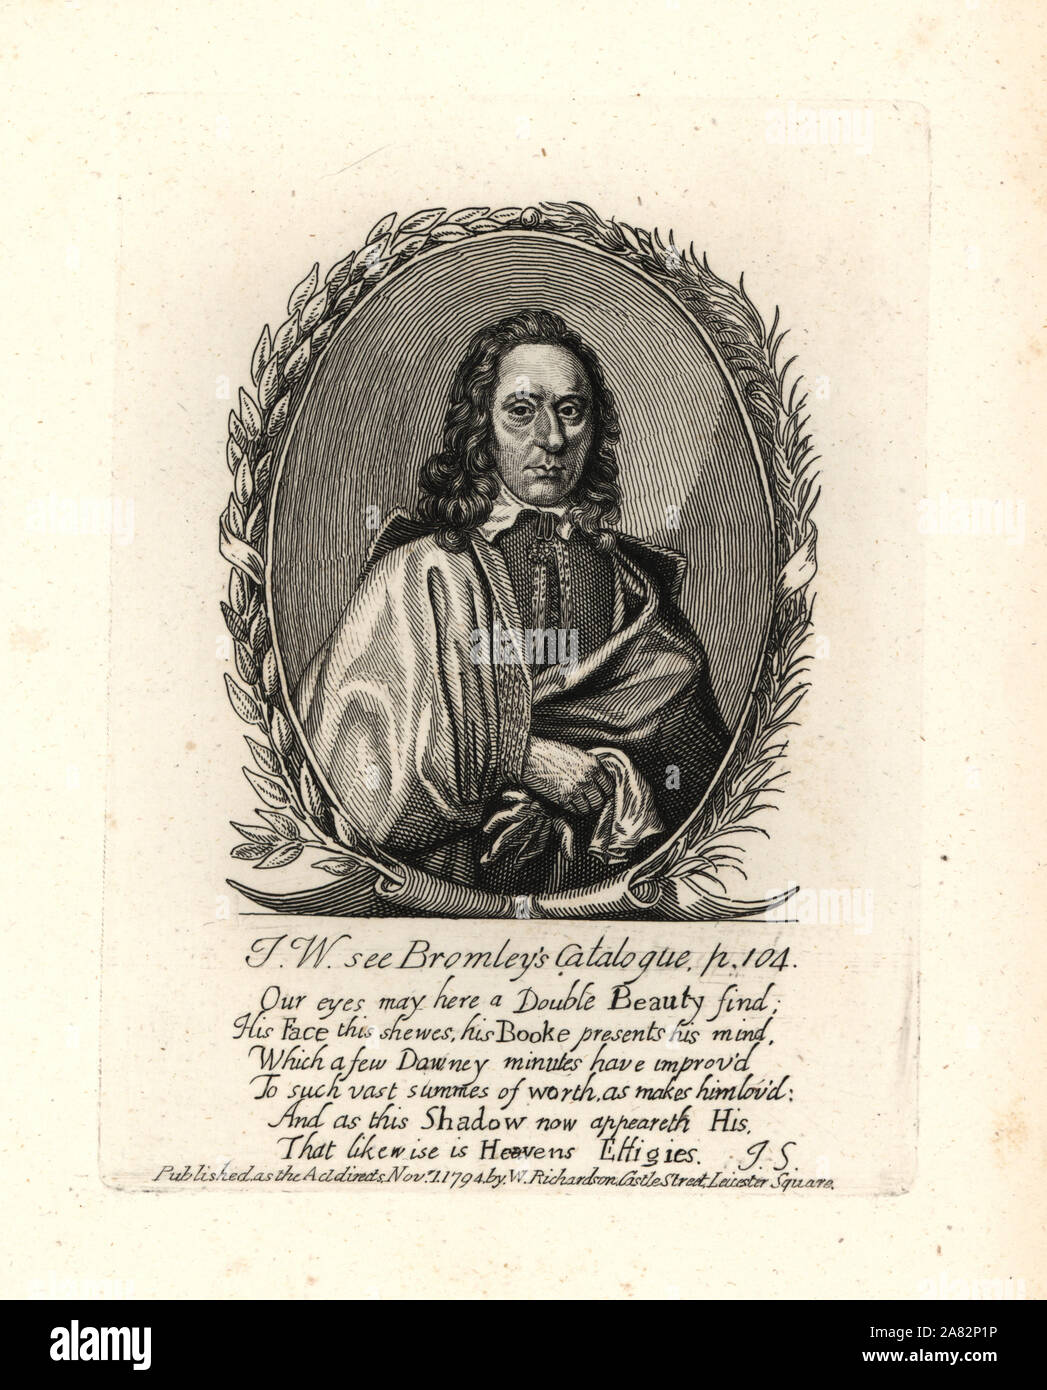 Thomas Weaver, English poet, 17th century. Copperplate engraving from William Richardson's Portraits Illustrating Granger's Biographical History of England, London, 1792–1812. James Granger (1723–1776) was an English clergyman, biographer, and print collector. Stock Photo